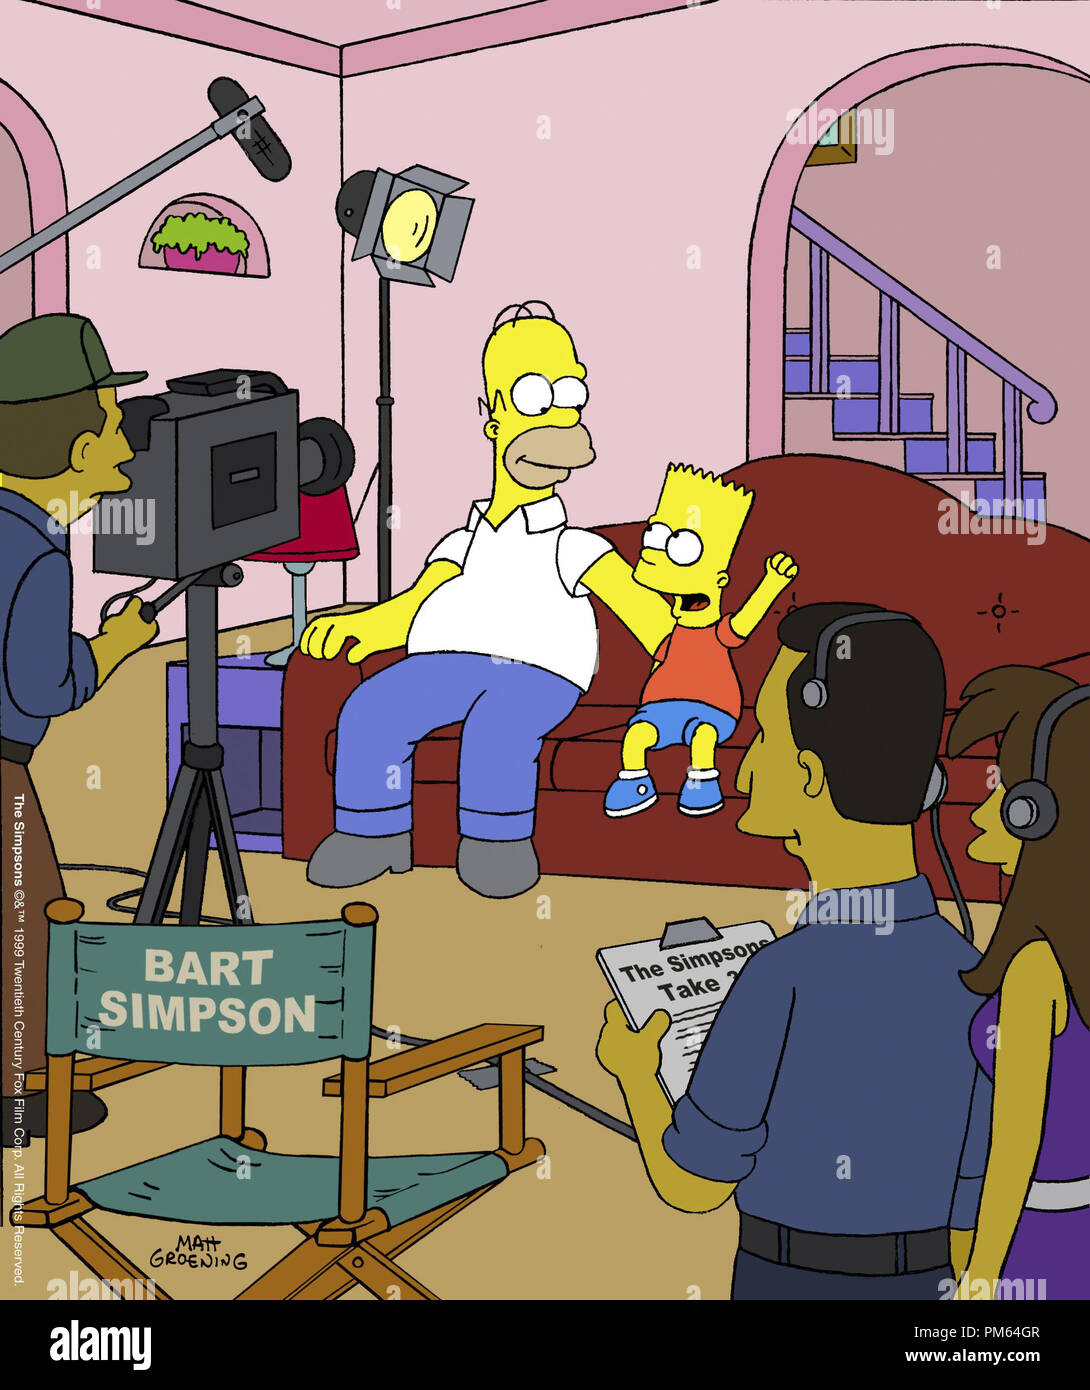 Film Still Publicity Stills From The Simpsons Episode Behind The Laughter Homer Simpson